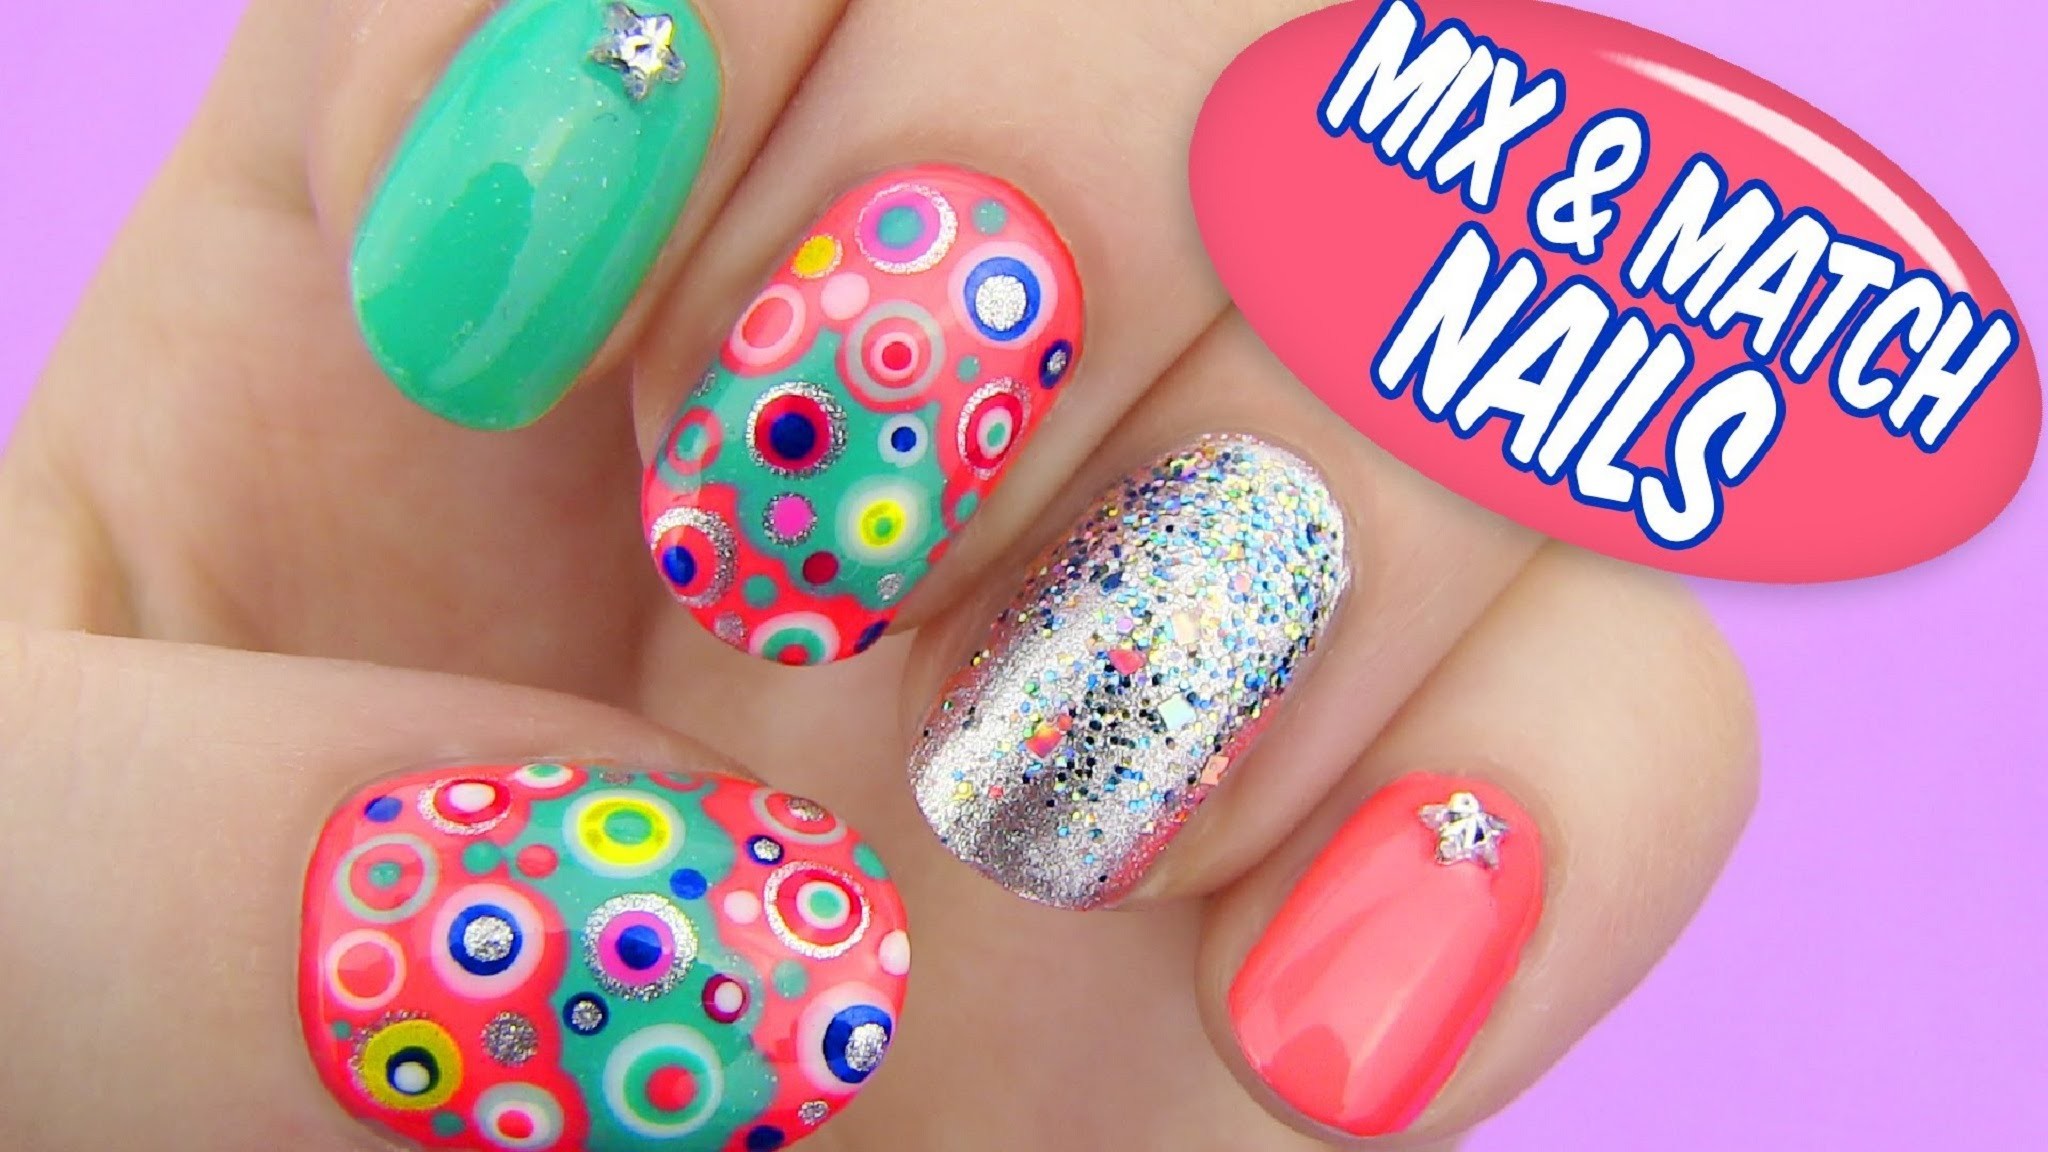 5. "Nail Art Compilation" video on Sara Beauty Corner channel - wide 1